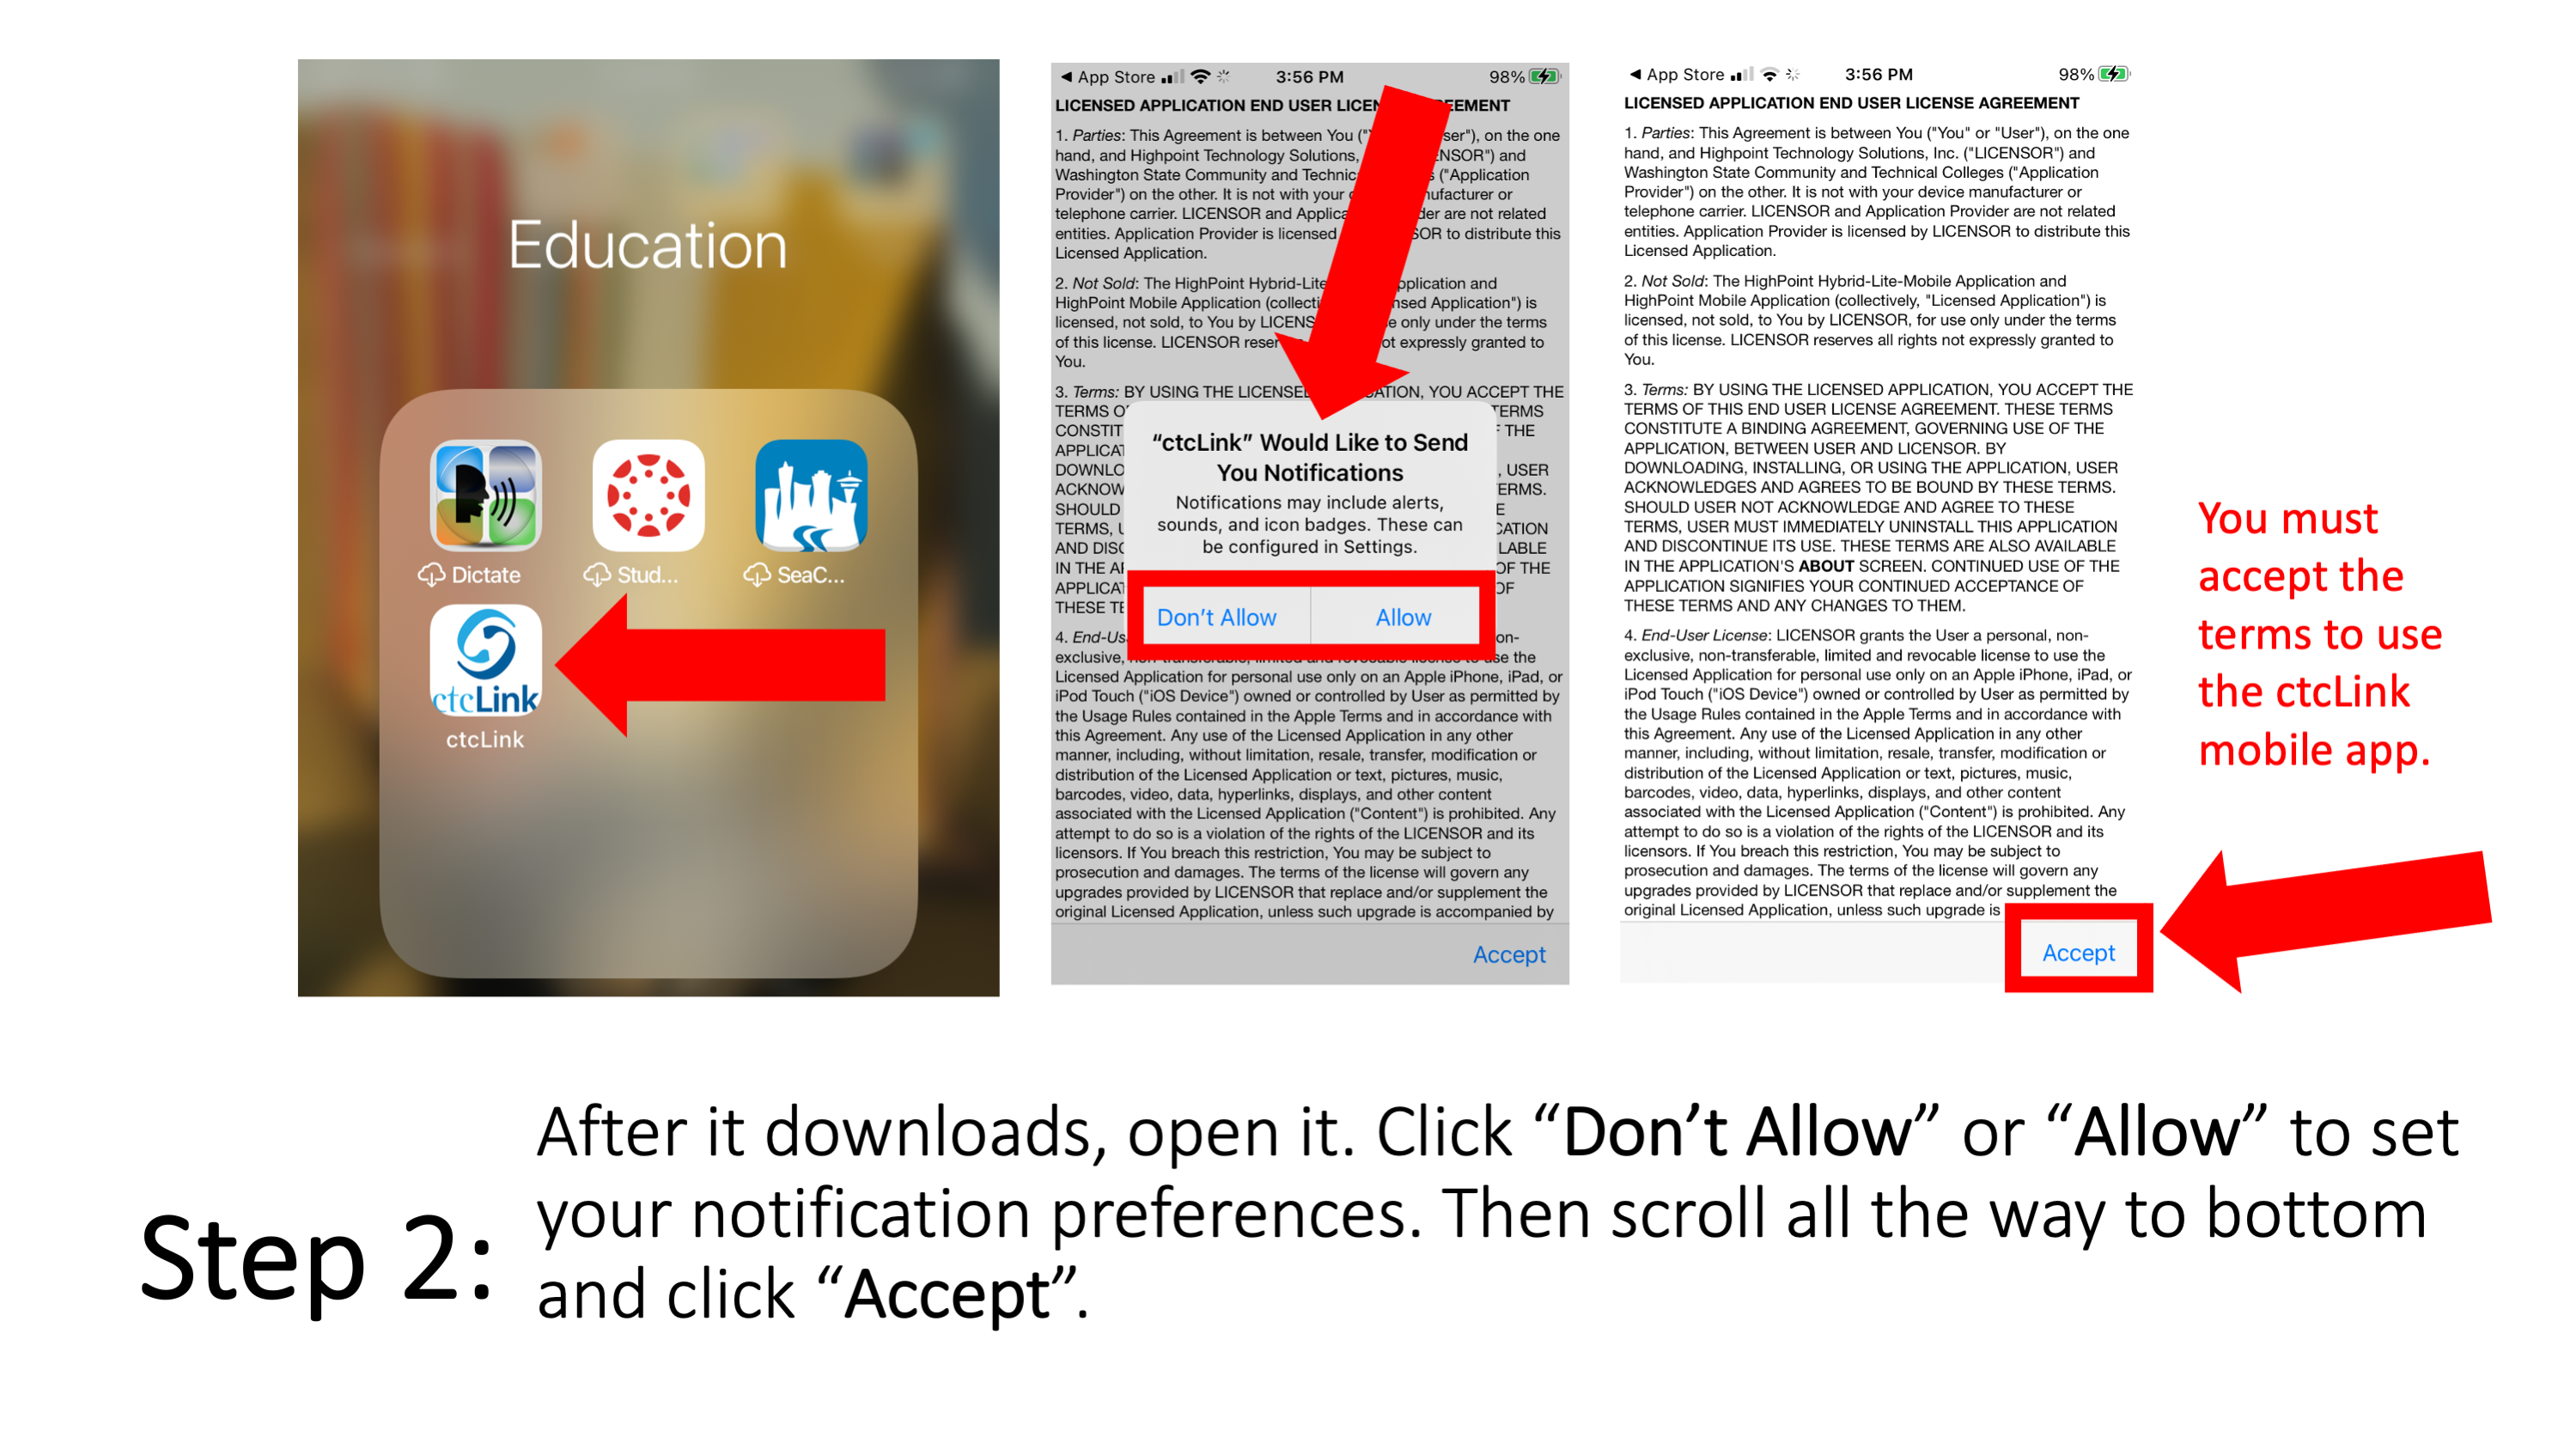 After it downloads, open it. Click “Don’t Allow” or “Allow” to set your notification preferences.   Then scroll all the way to bottom and click “Accept”. You must accept the terms to use the ctcLink mobile app.